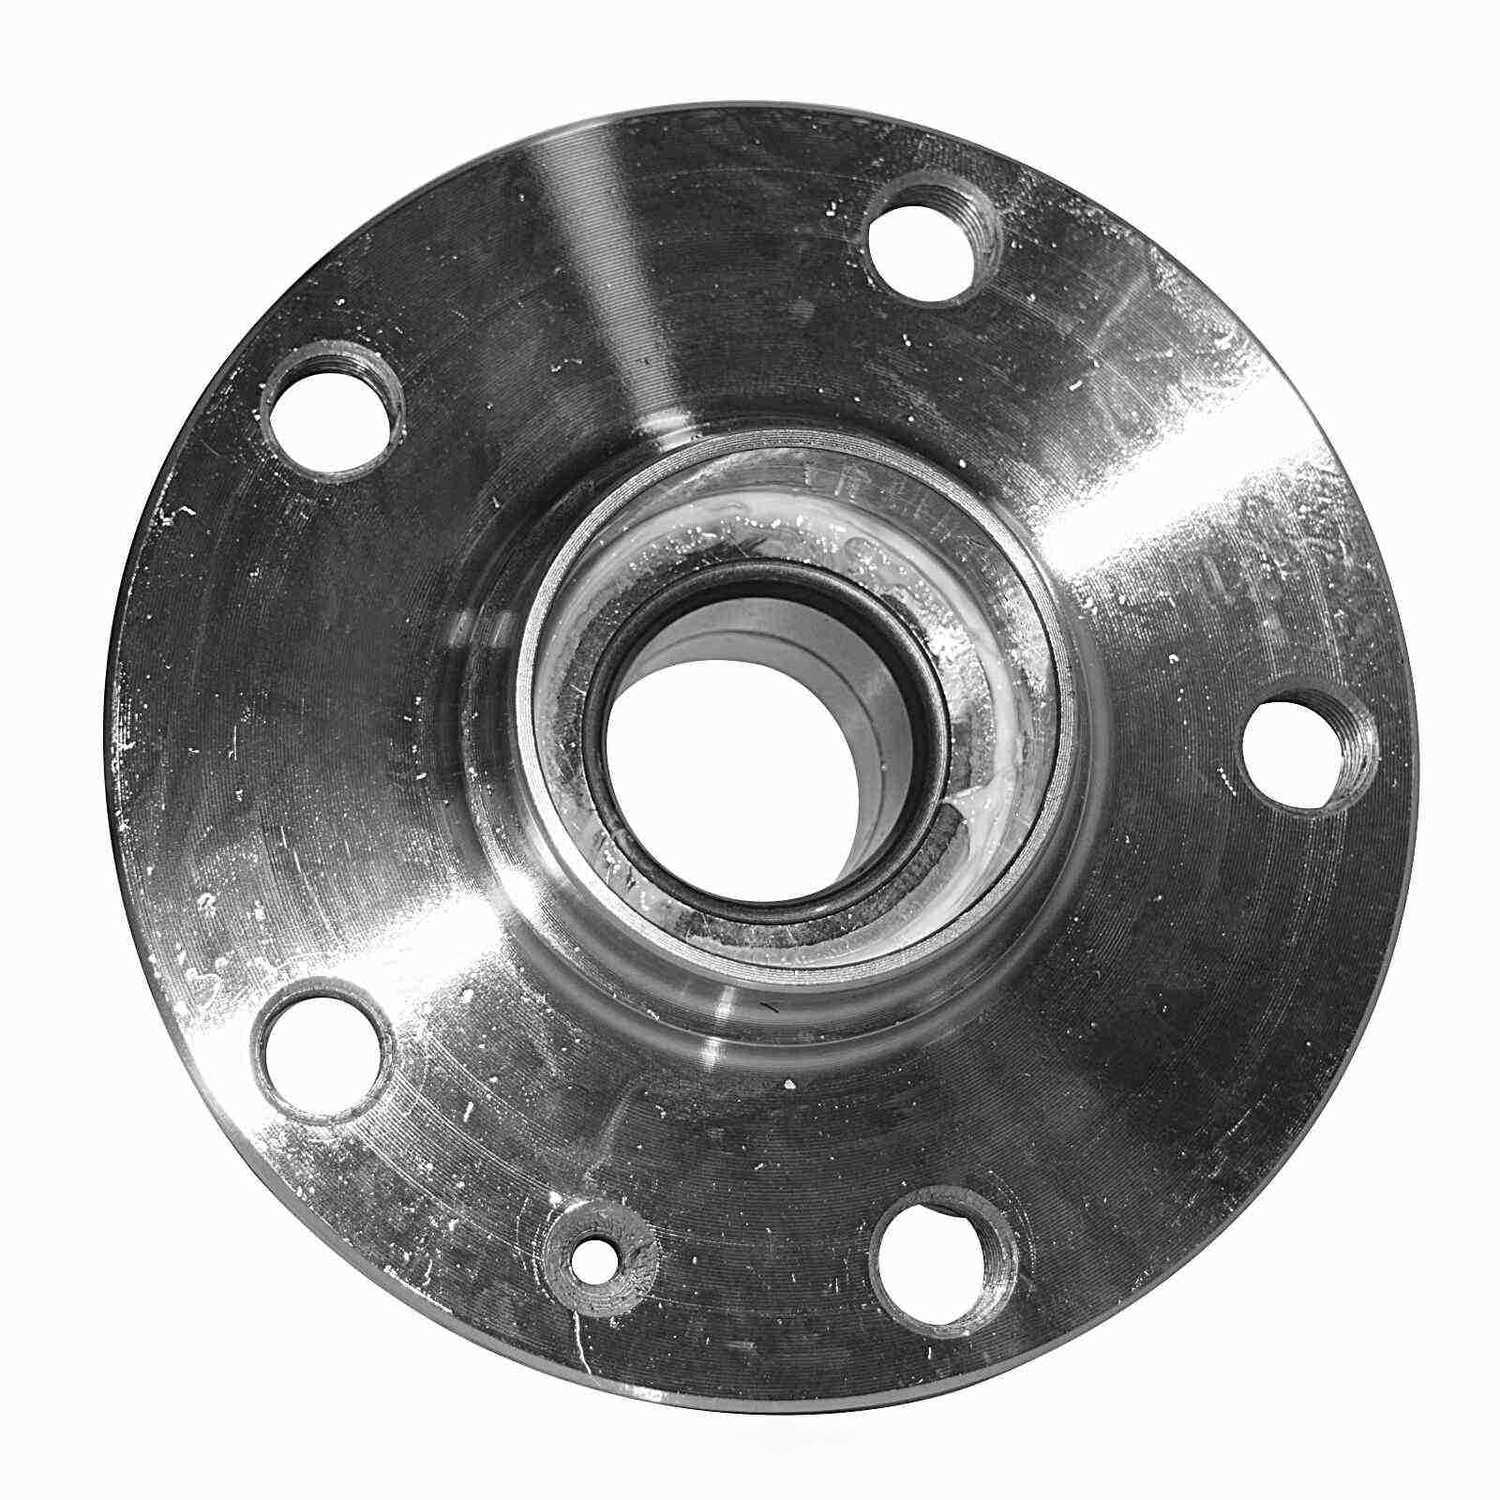 GSP NORTH AMERICA INC. - GSP Axle Bearing & Hub Assembly (Rear) - AD8 233319